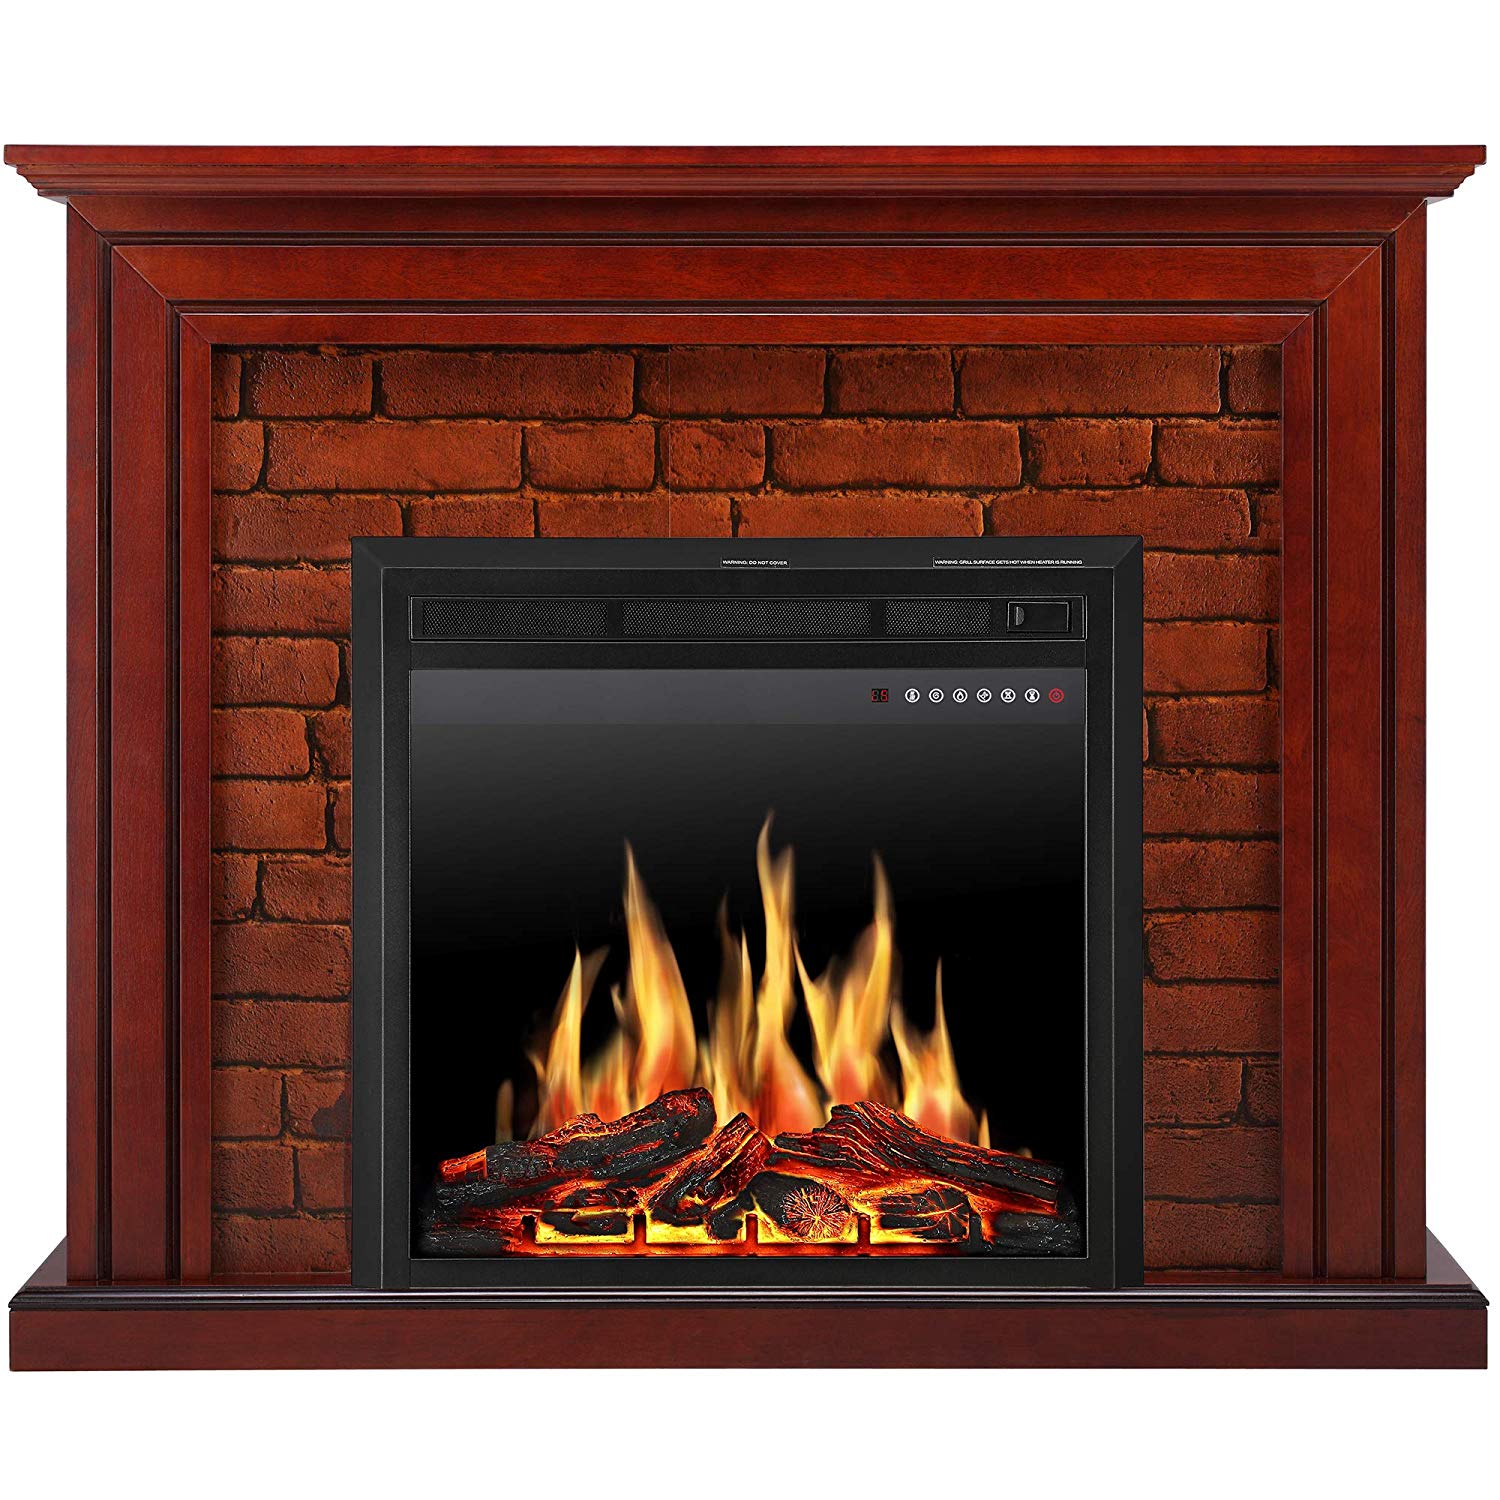 Electric Fireplace No Heat Inspirational Jamfly Electric Fireplace Mantel Package Traditional Brick Wall Design Heater with Remote Control and Led touch Screen Home Accent Furnishings